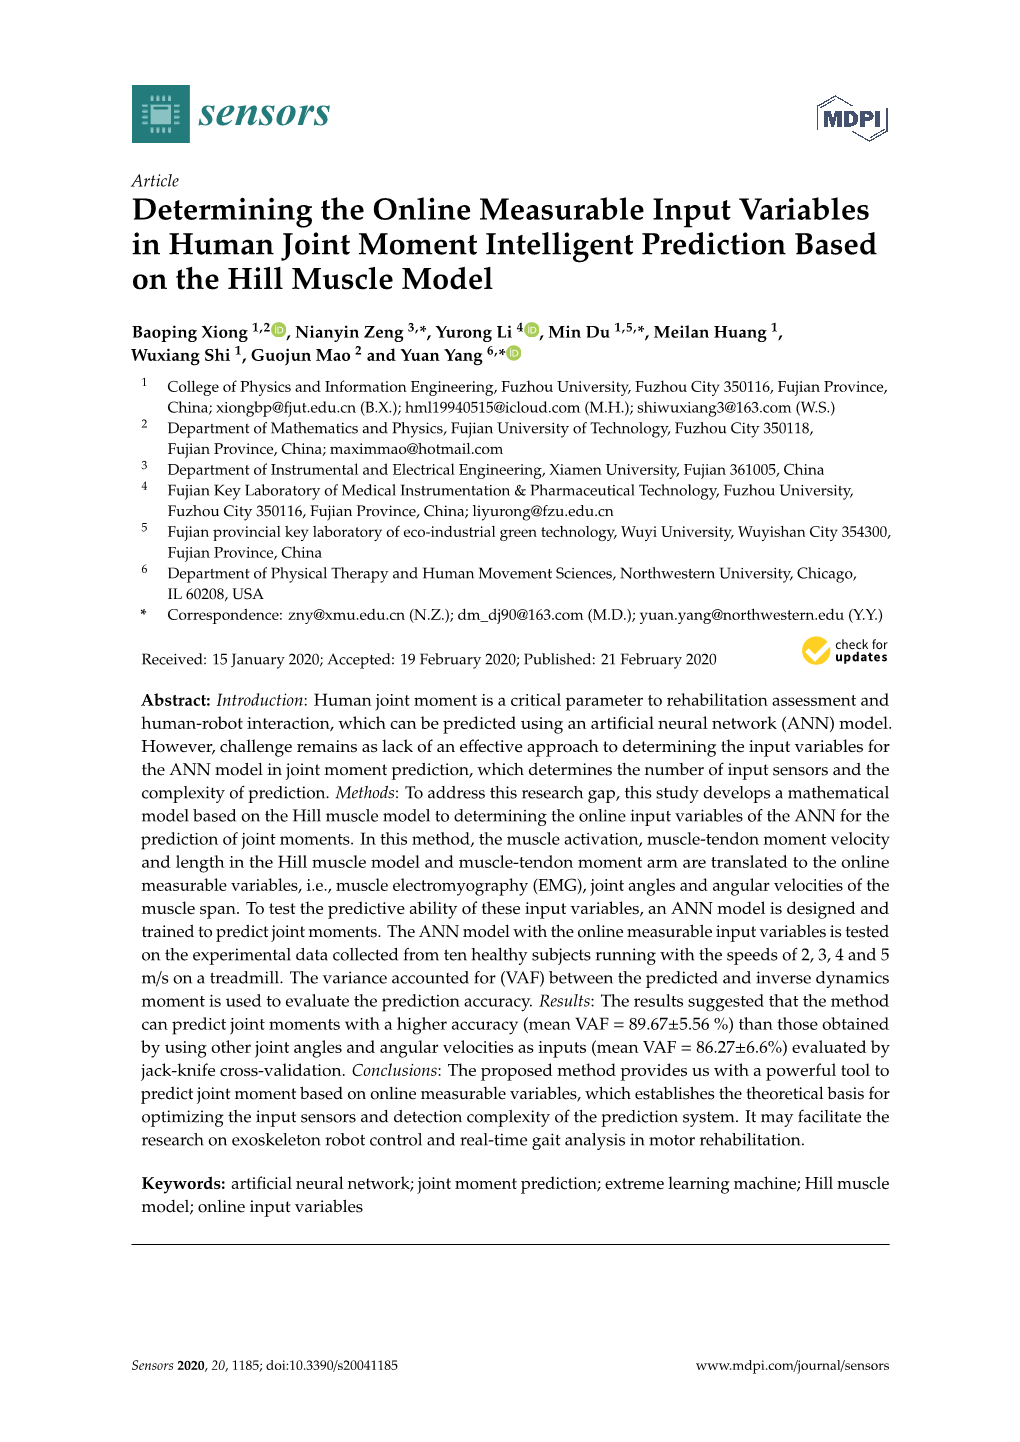 Determining the Online Measurable Input Variables in Human Joint Moment Intelligent Prediction Based on the Hill Muscle Model